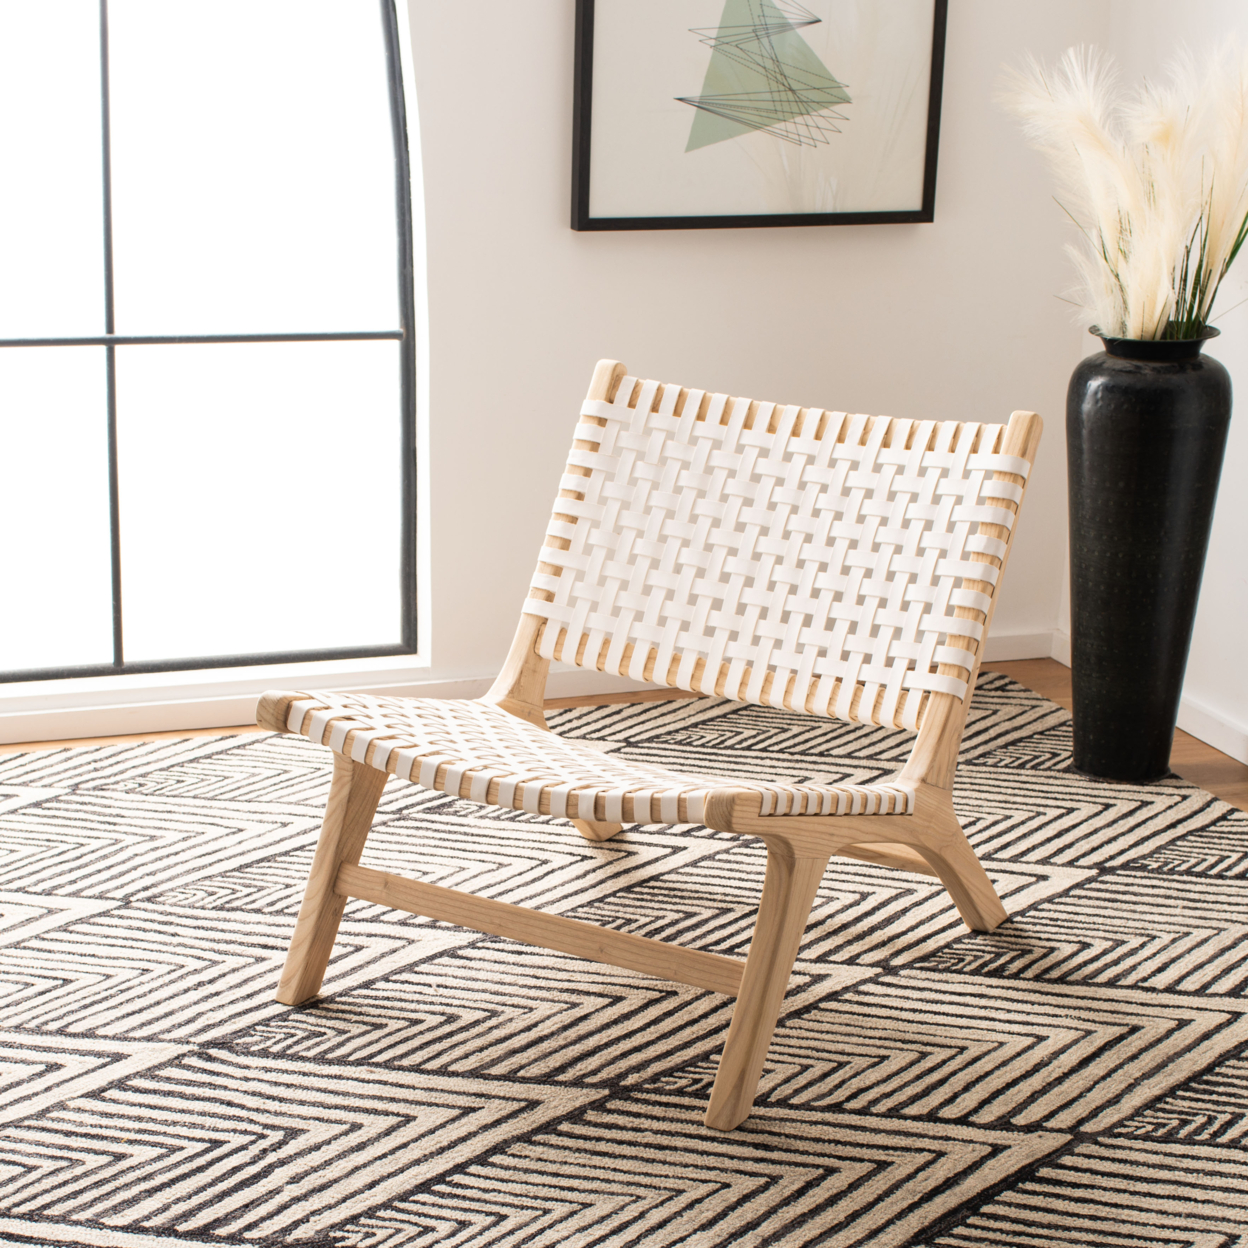 SAFAVIEH Luna Leather Woven Accent Chair White / Natural